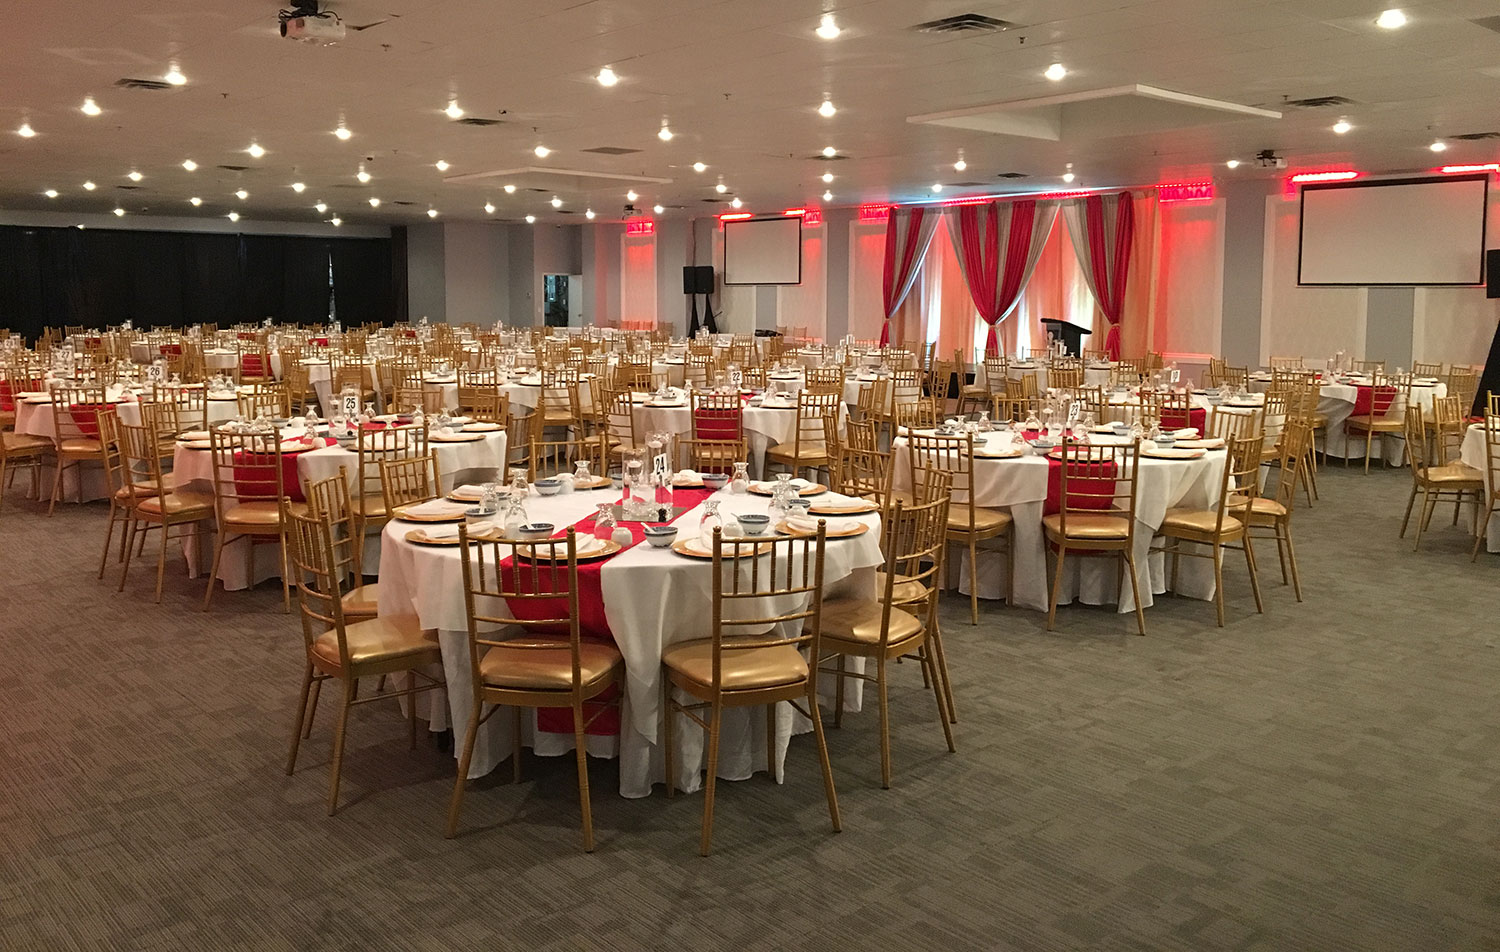 photo of White Diamond Conference Center, a banquet hall in Calgary for hosting events such as Chinese New Year, Christmas and New Years parties